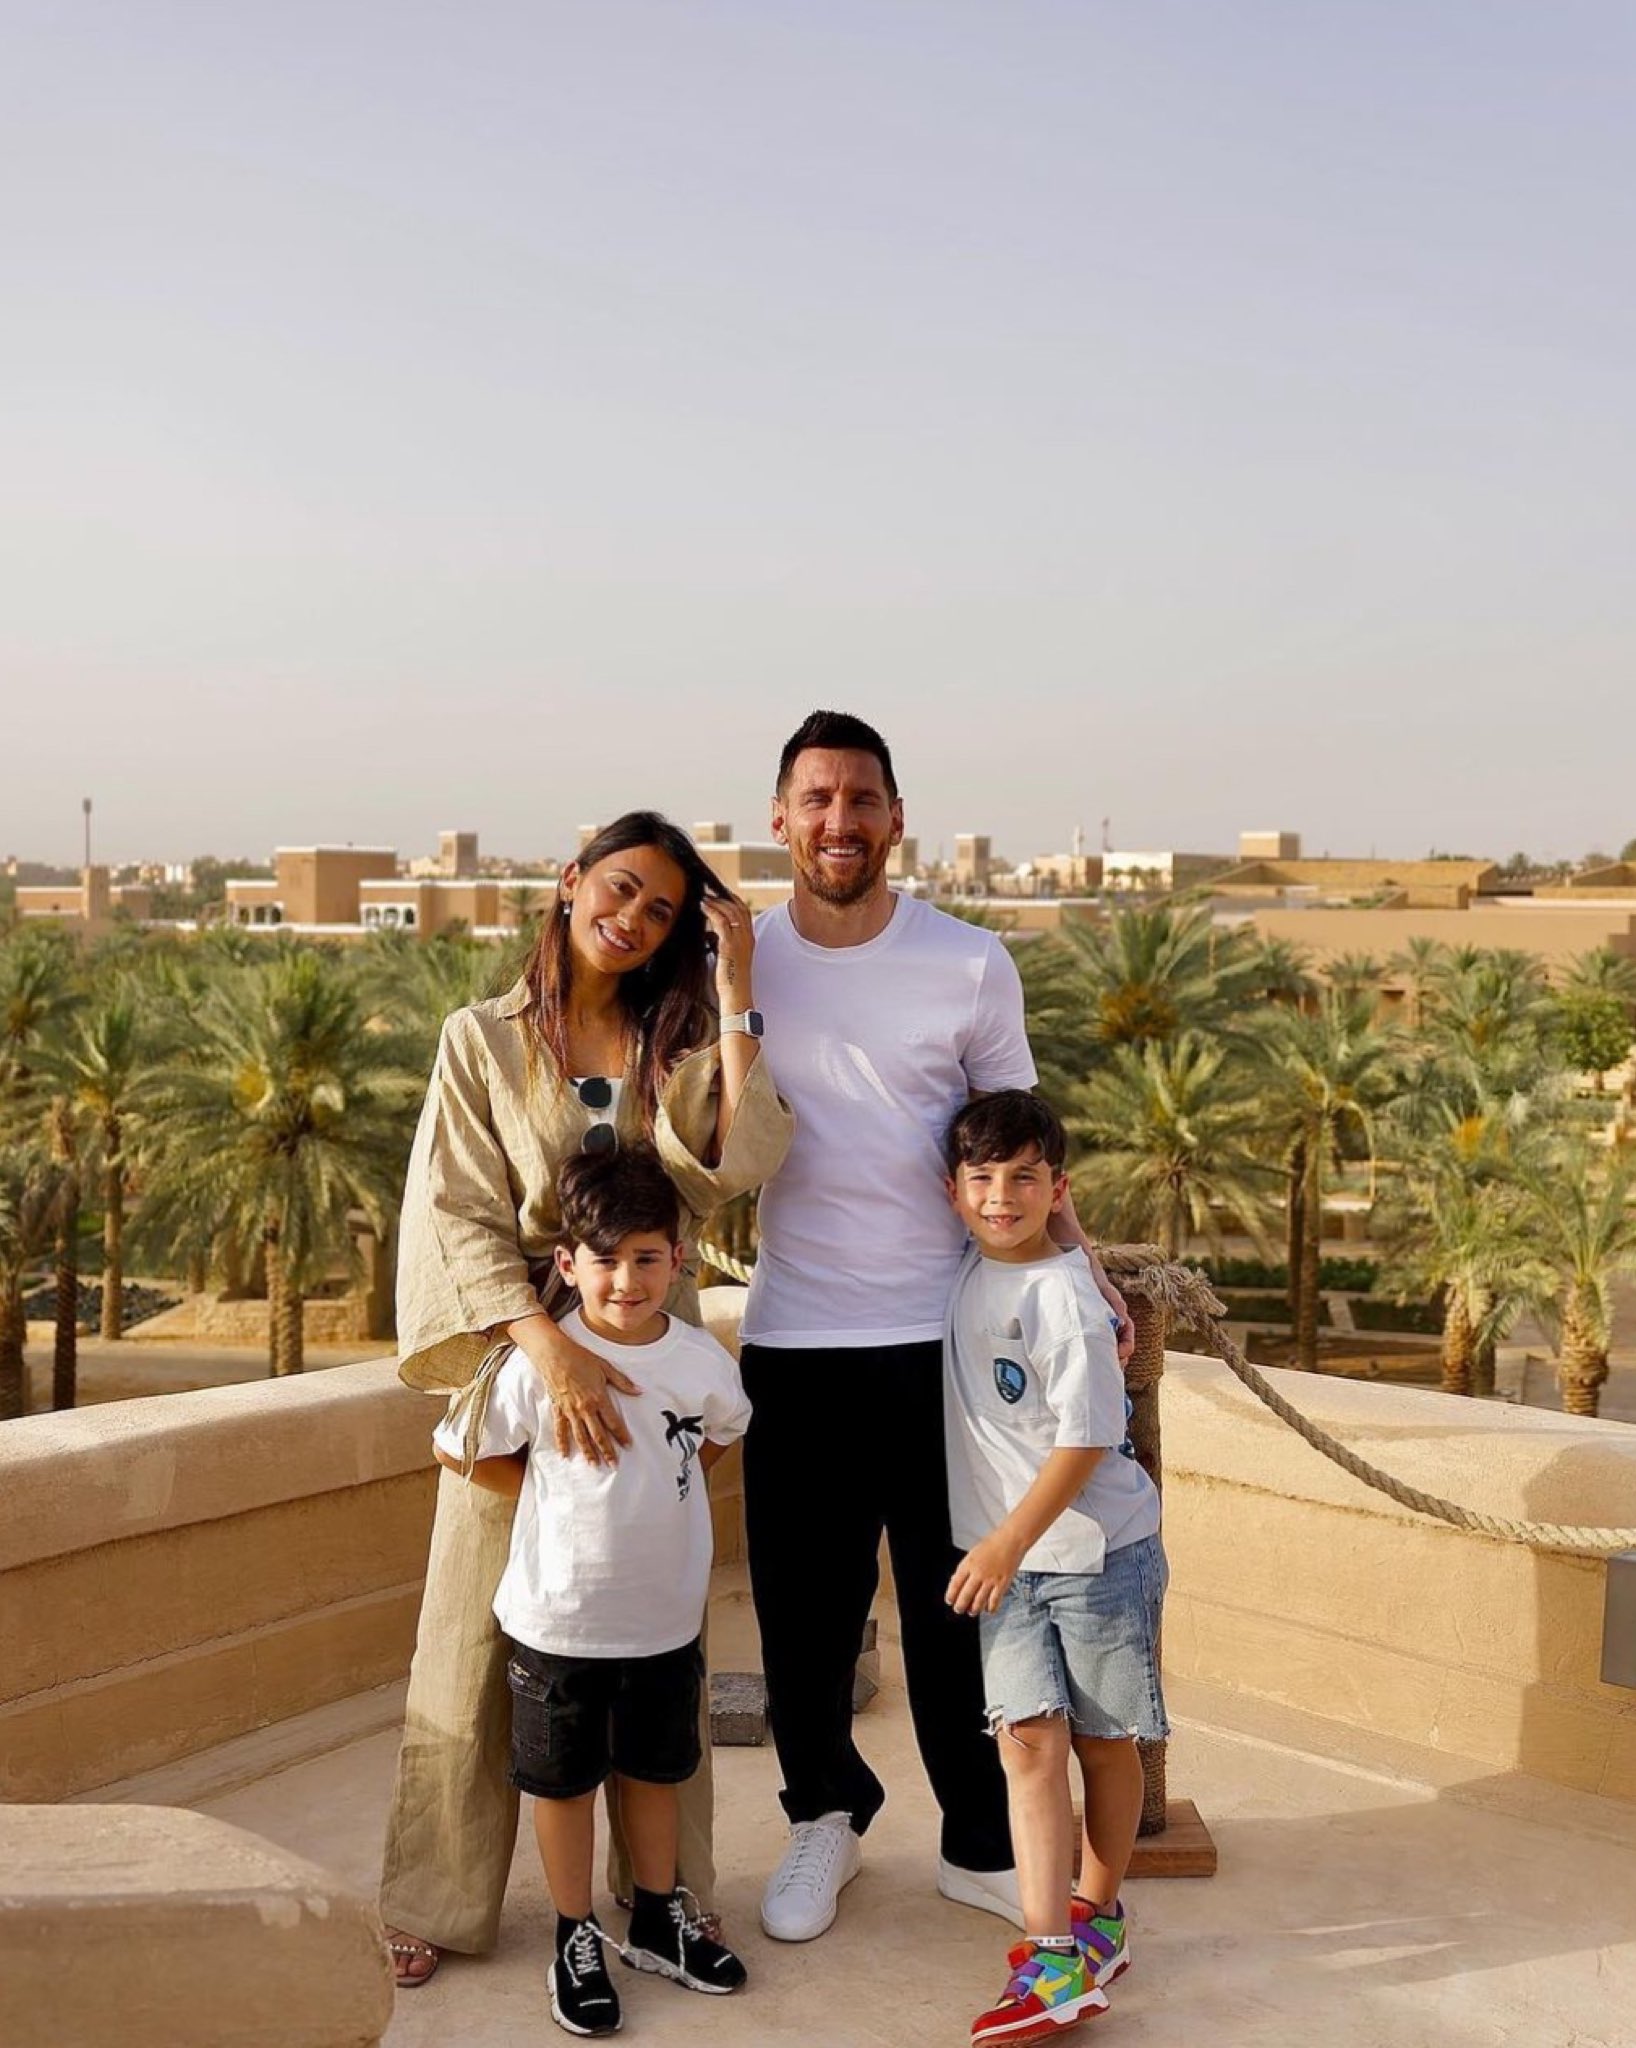 João Leitão on X: "Lionel Messi is currently on vacation in Marrakech  with his family. They arrived in Marrakech this morning.   https://t.co/W7dLBLuhIG" / X